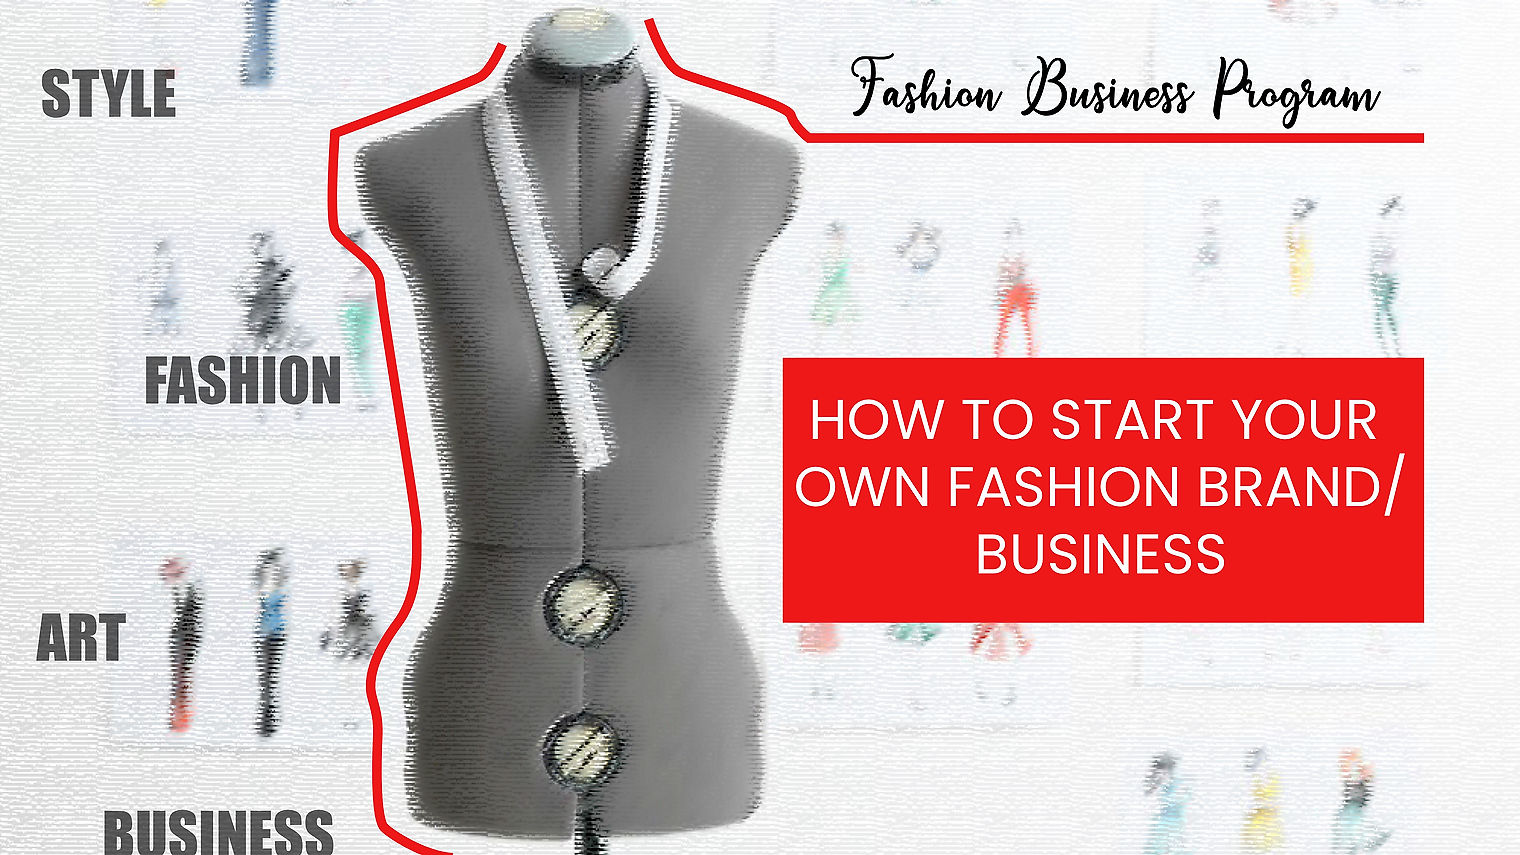 How to start your own fashion brand/ business